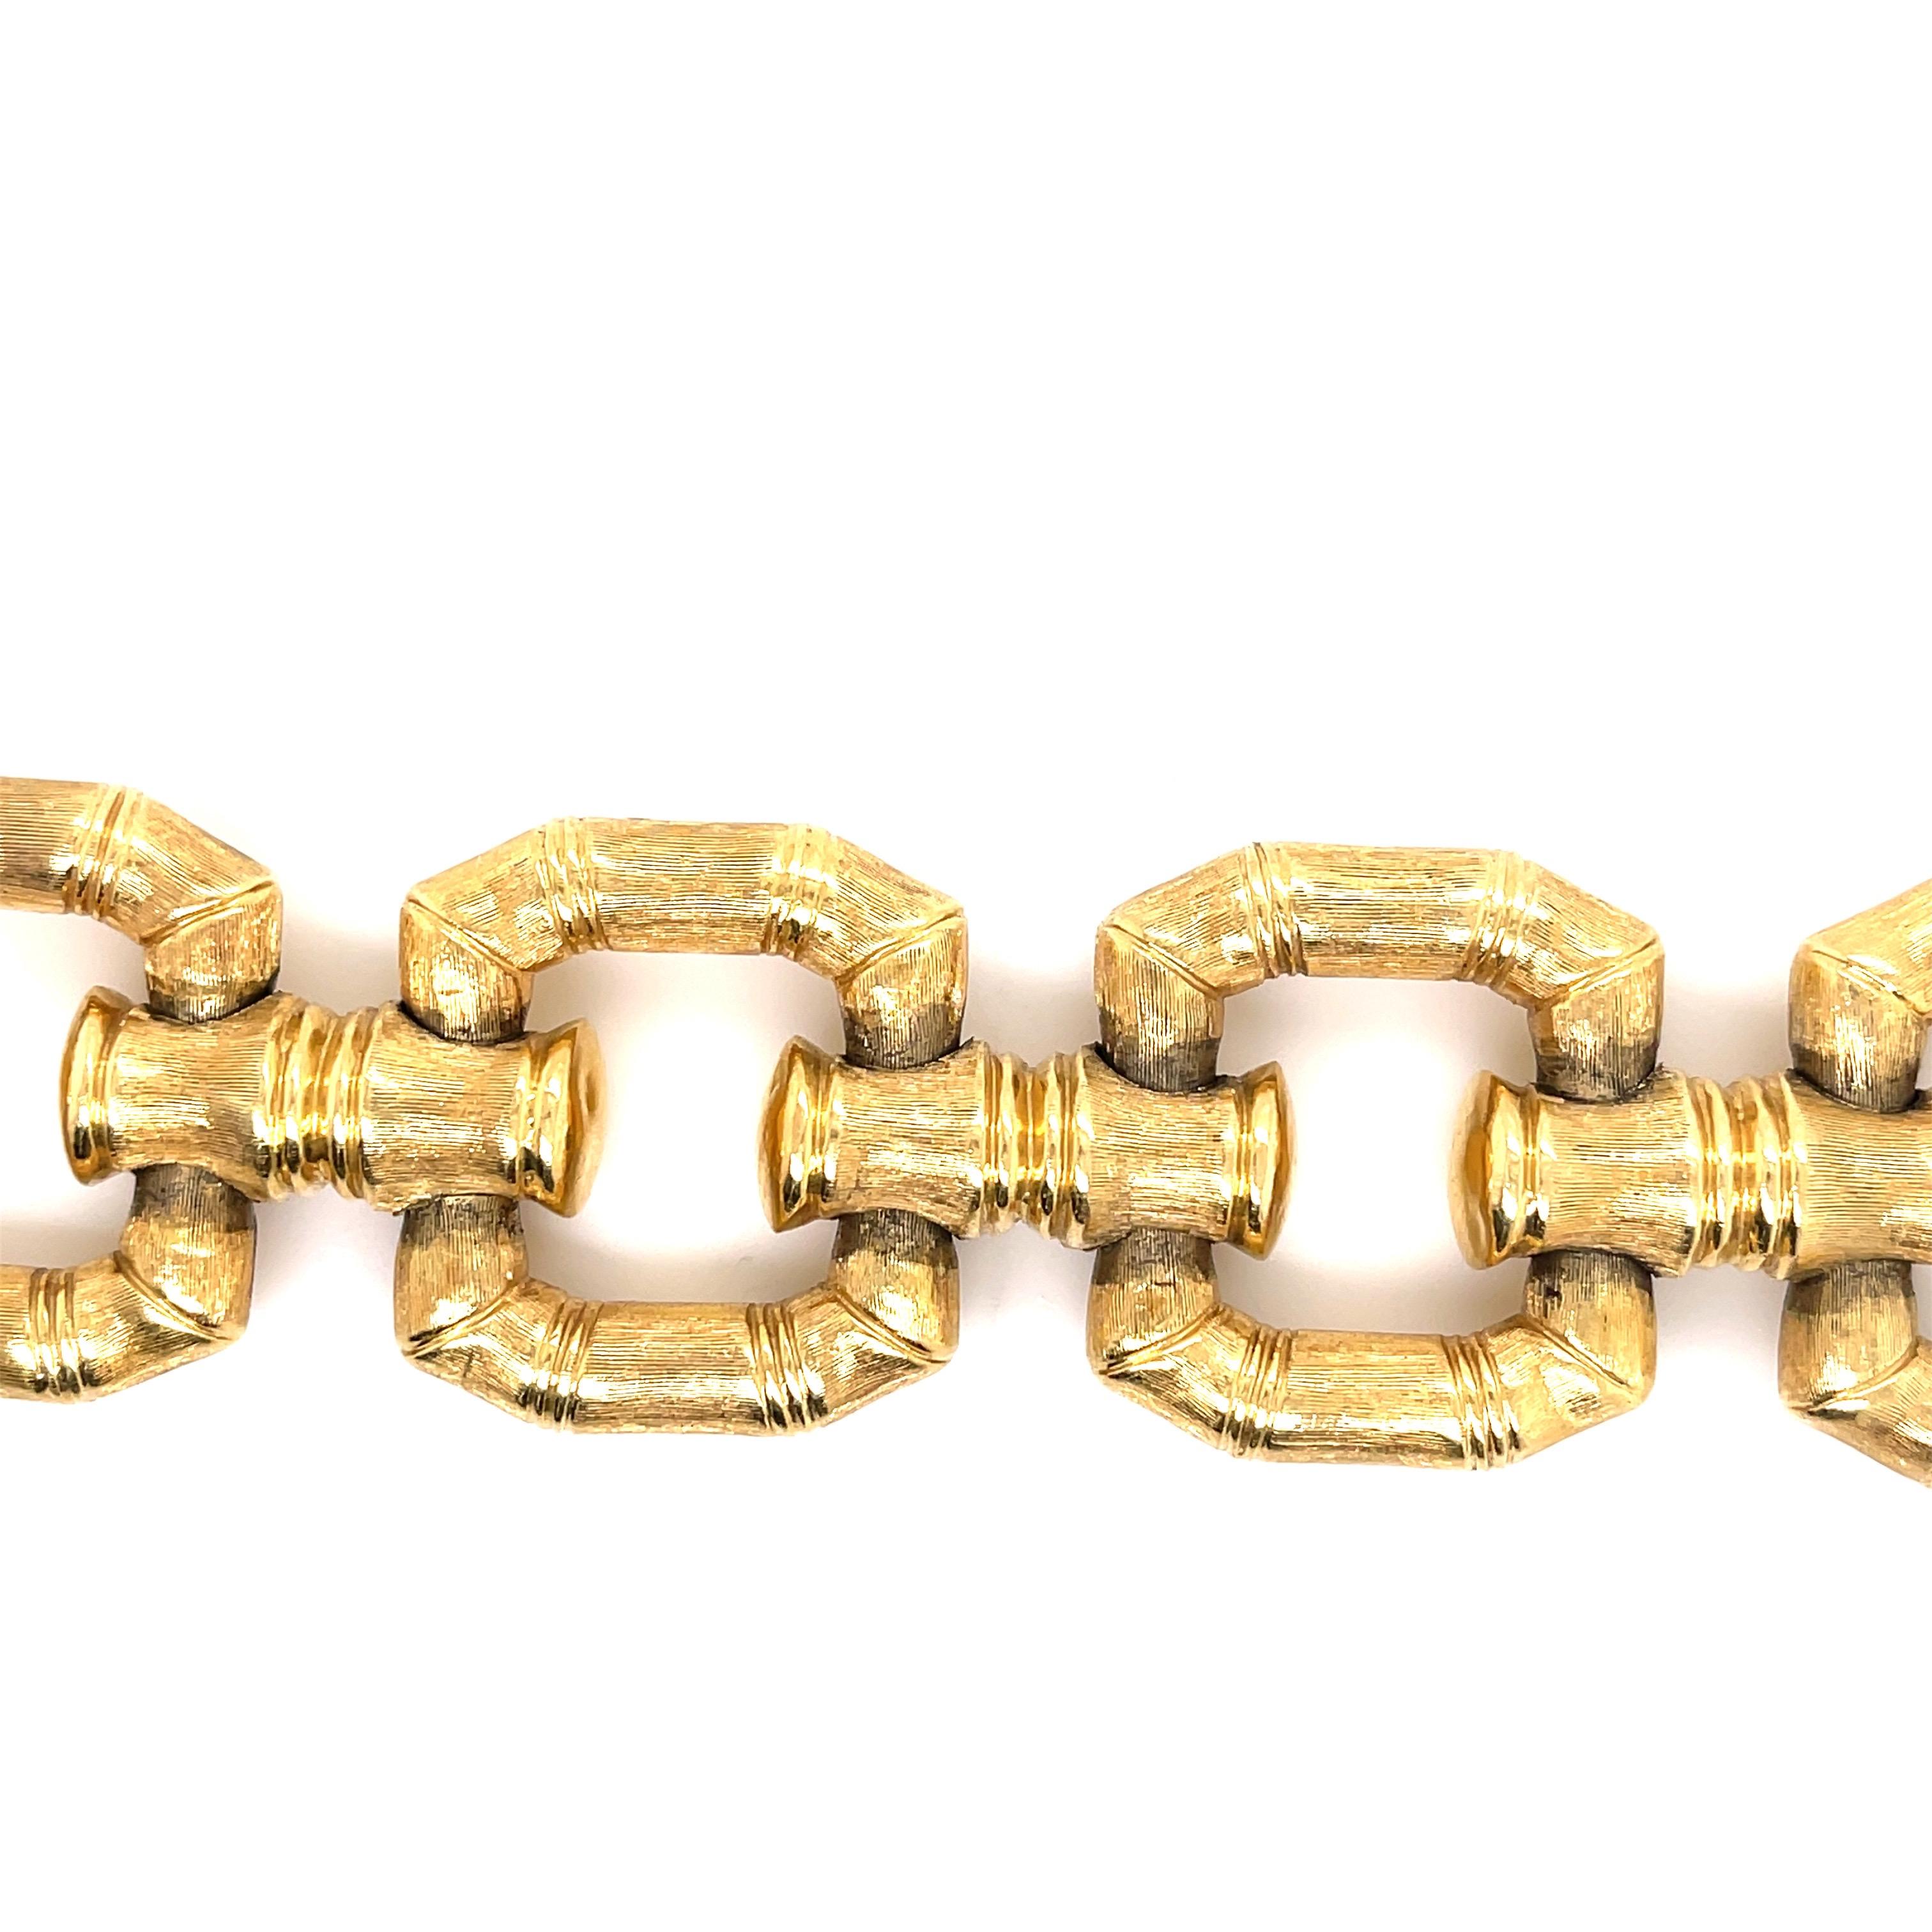 18 Karat Yellow gold bracelet featuring a Bamboo motif link weighing 63.9 grams. 
More link bracelets available.
Search Harbor Diamonds

DM for more pictures and videos. 